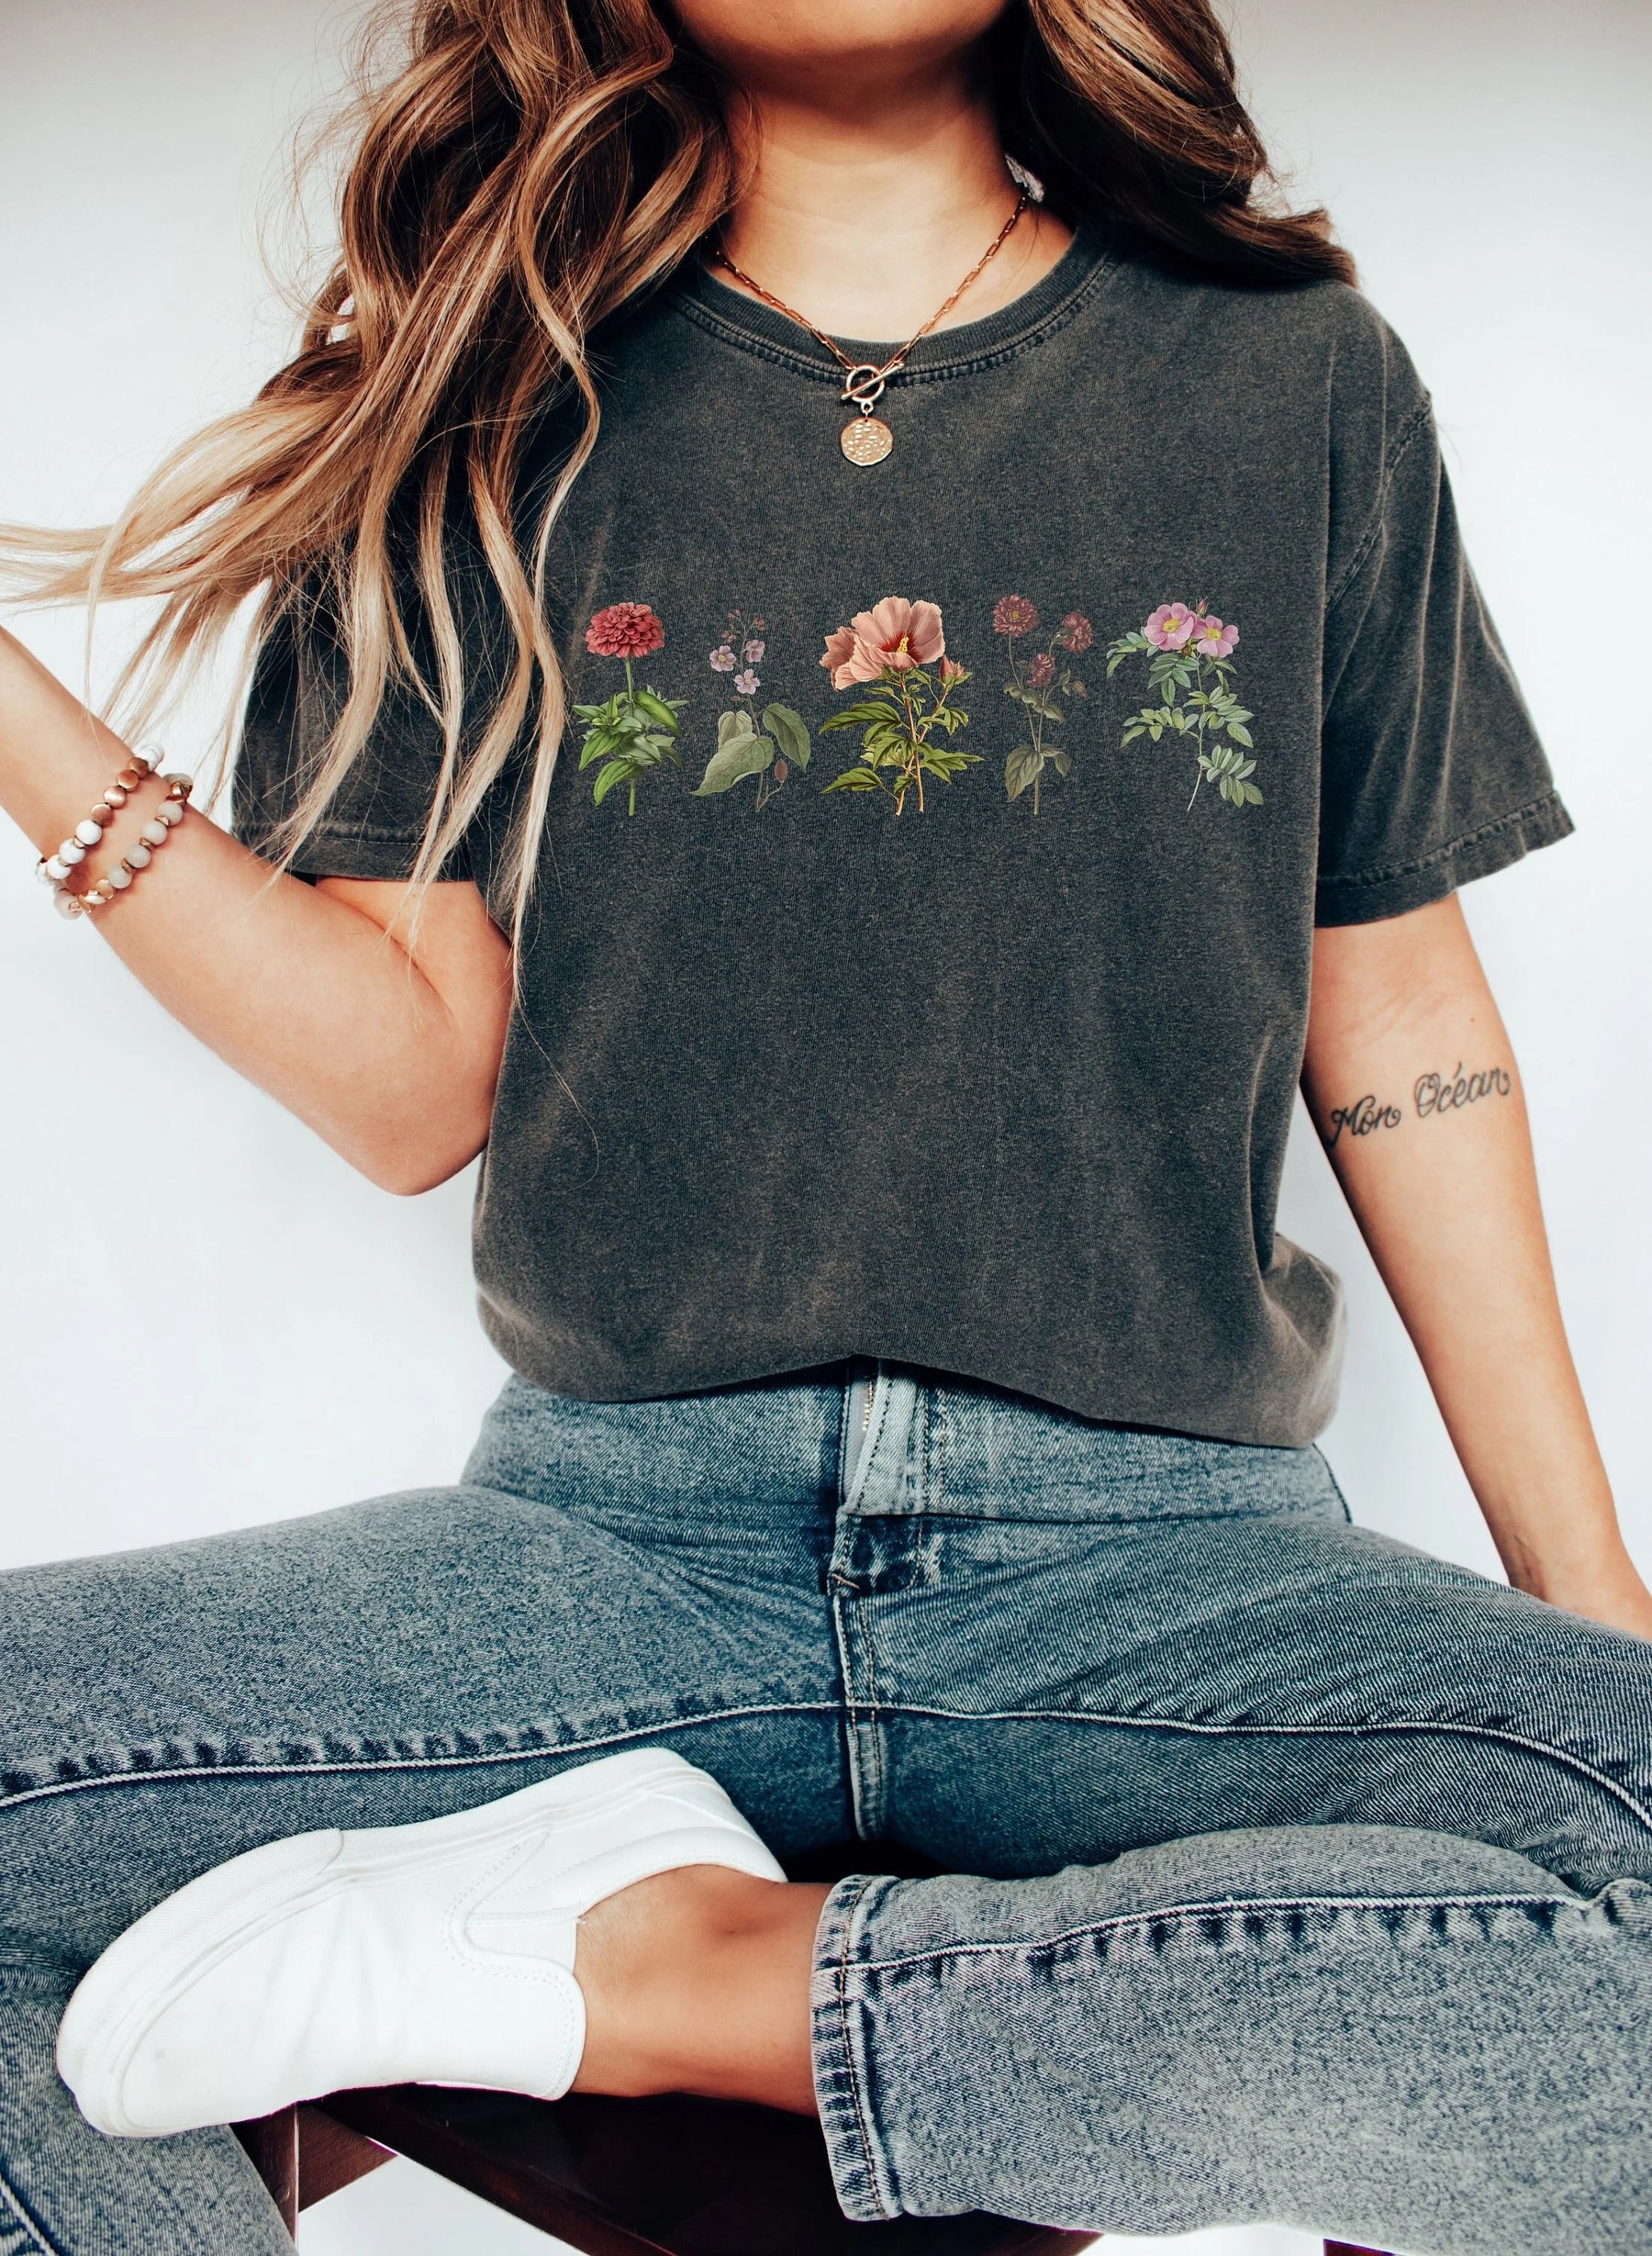 Wildflower Comfortable Colorful Floral Shirt